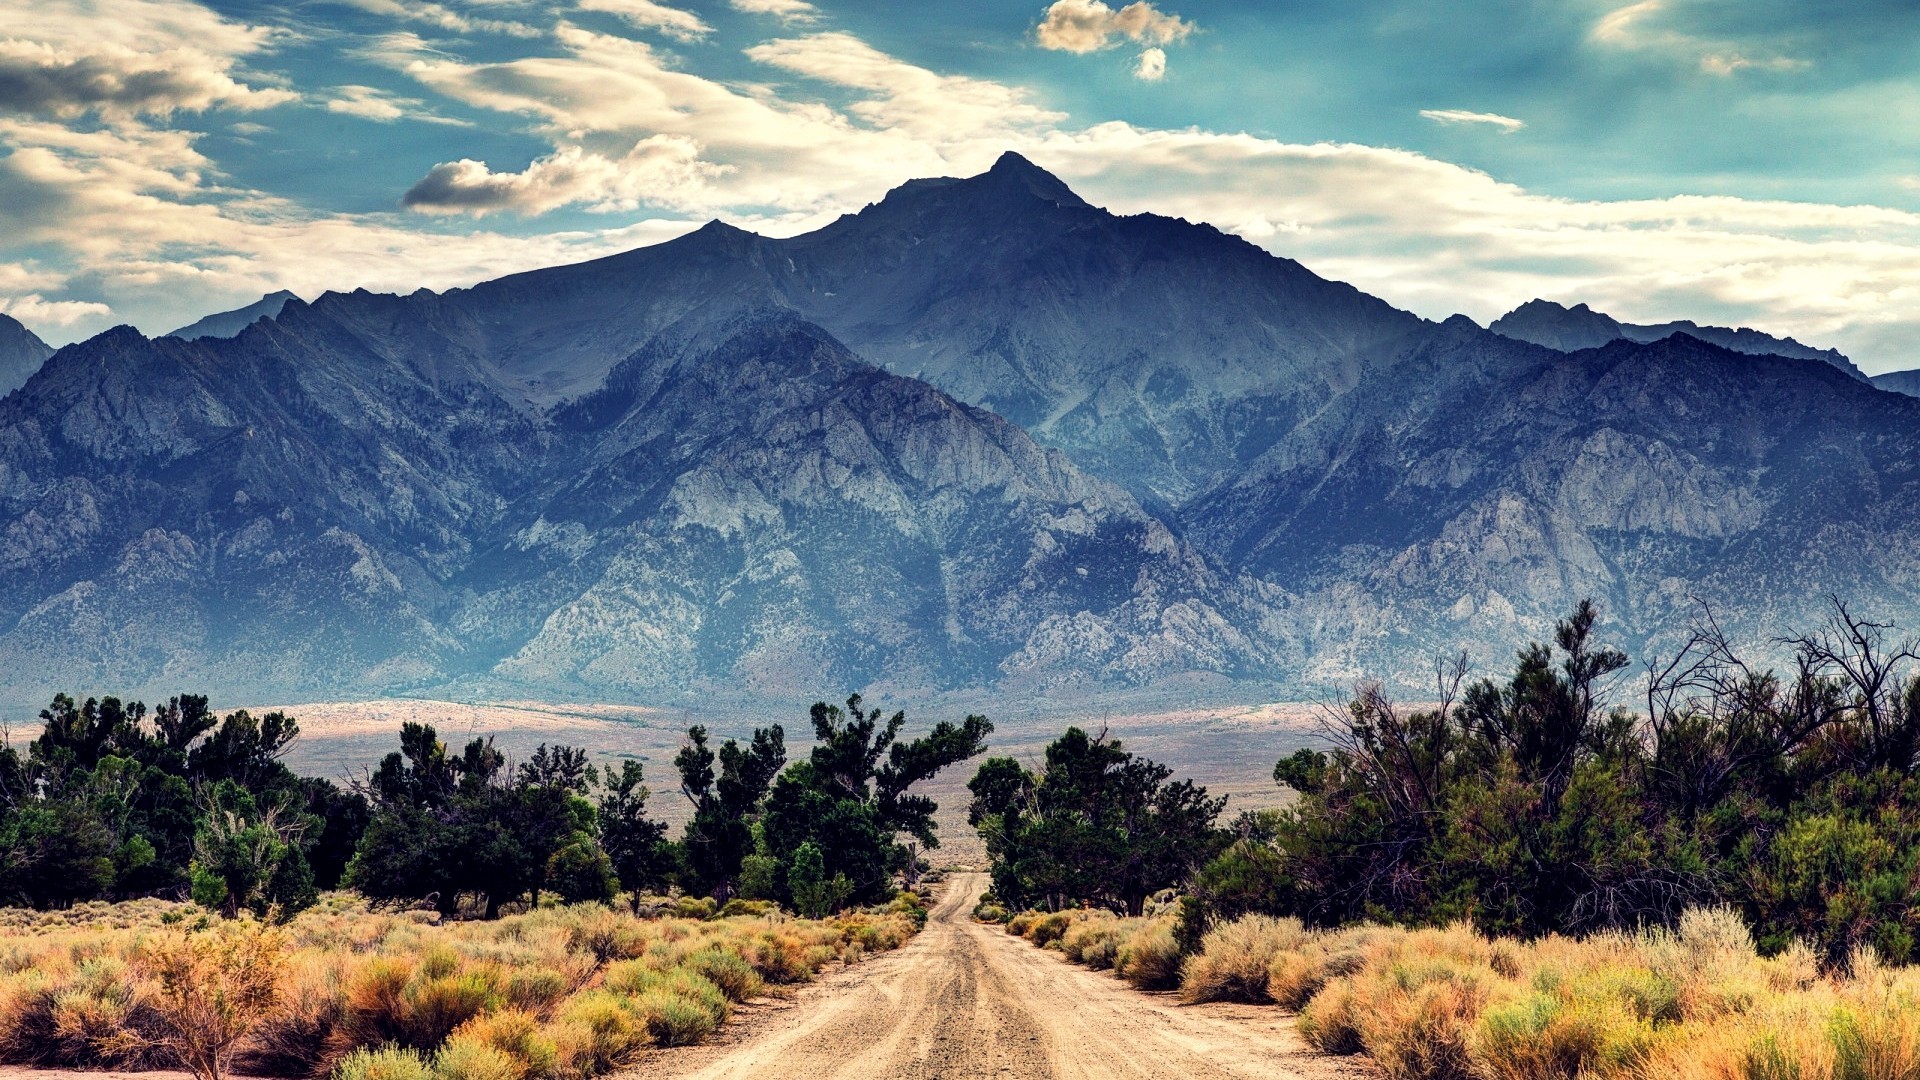 General 1920x1080 landscape mountains nature road dirt road outdoors long road